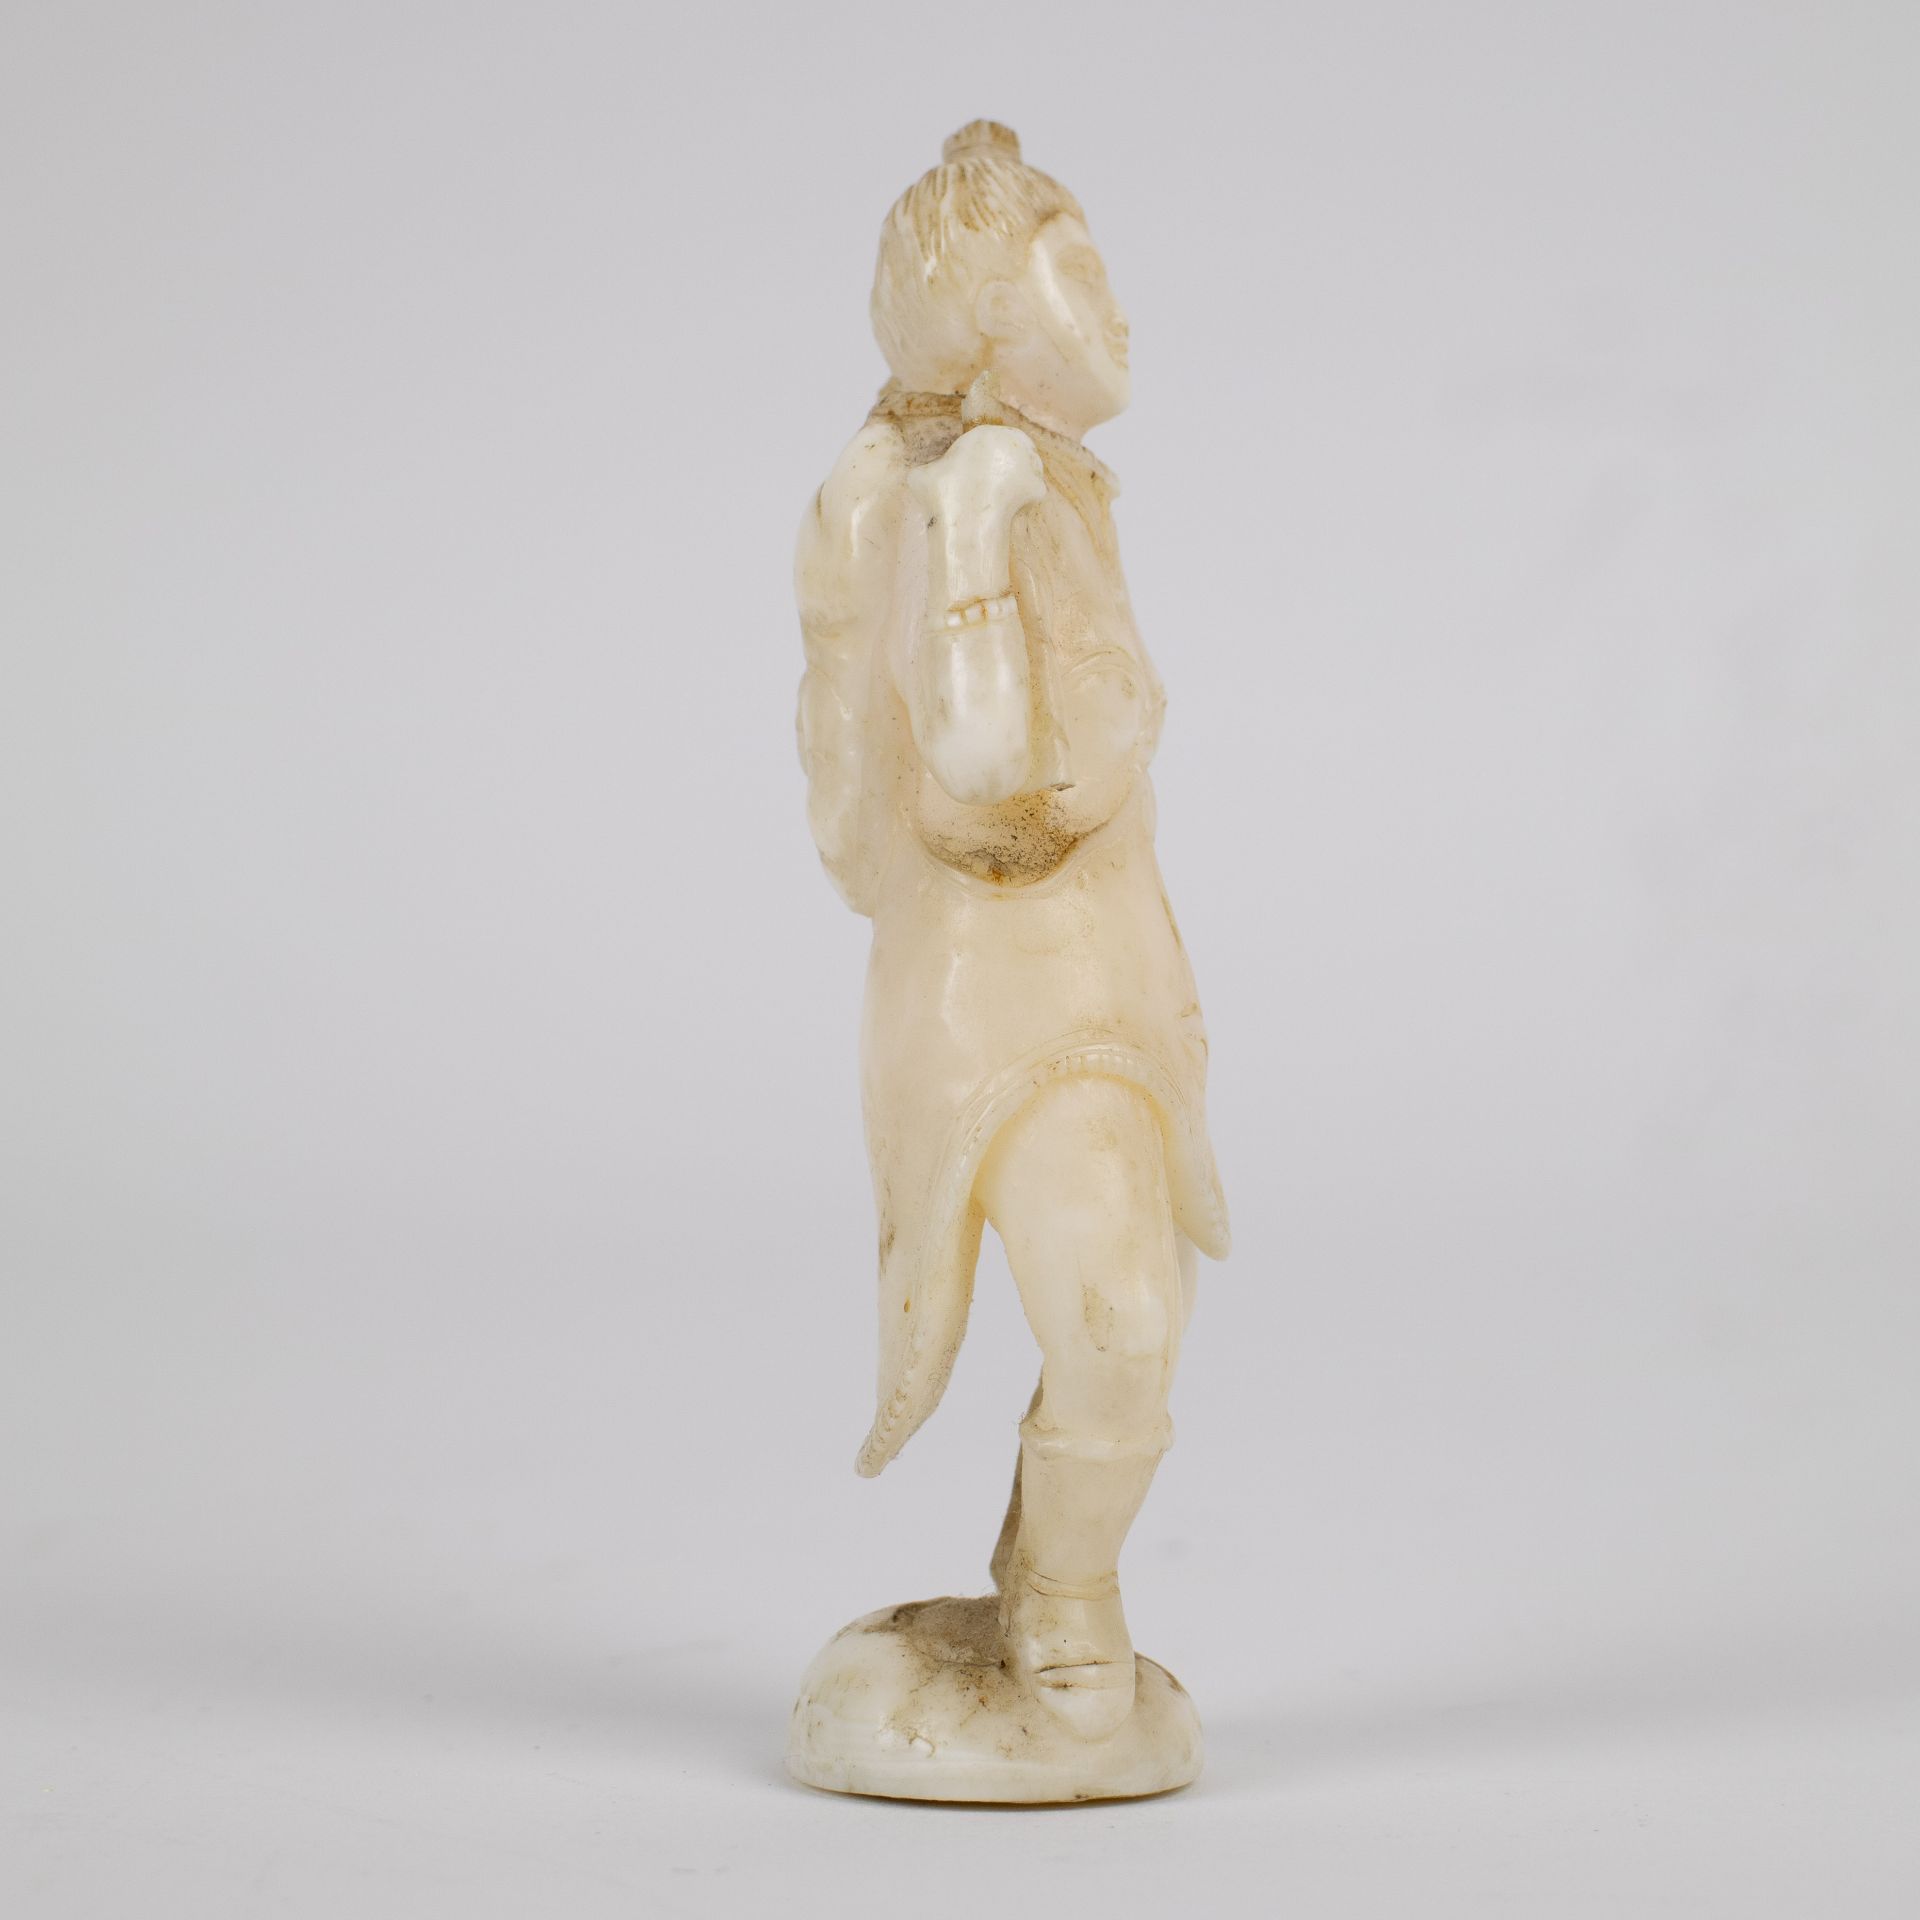 Marine ivory sculpture of a woman carrying a child on her back, Greenland, early 20th century. - Image 4 of 4